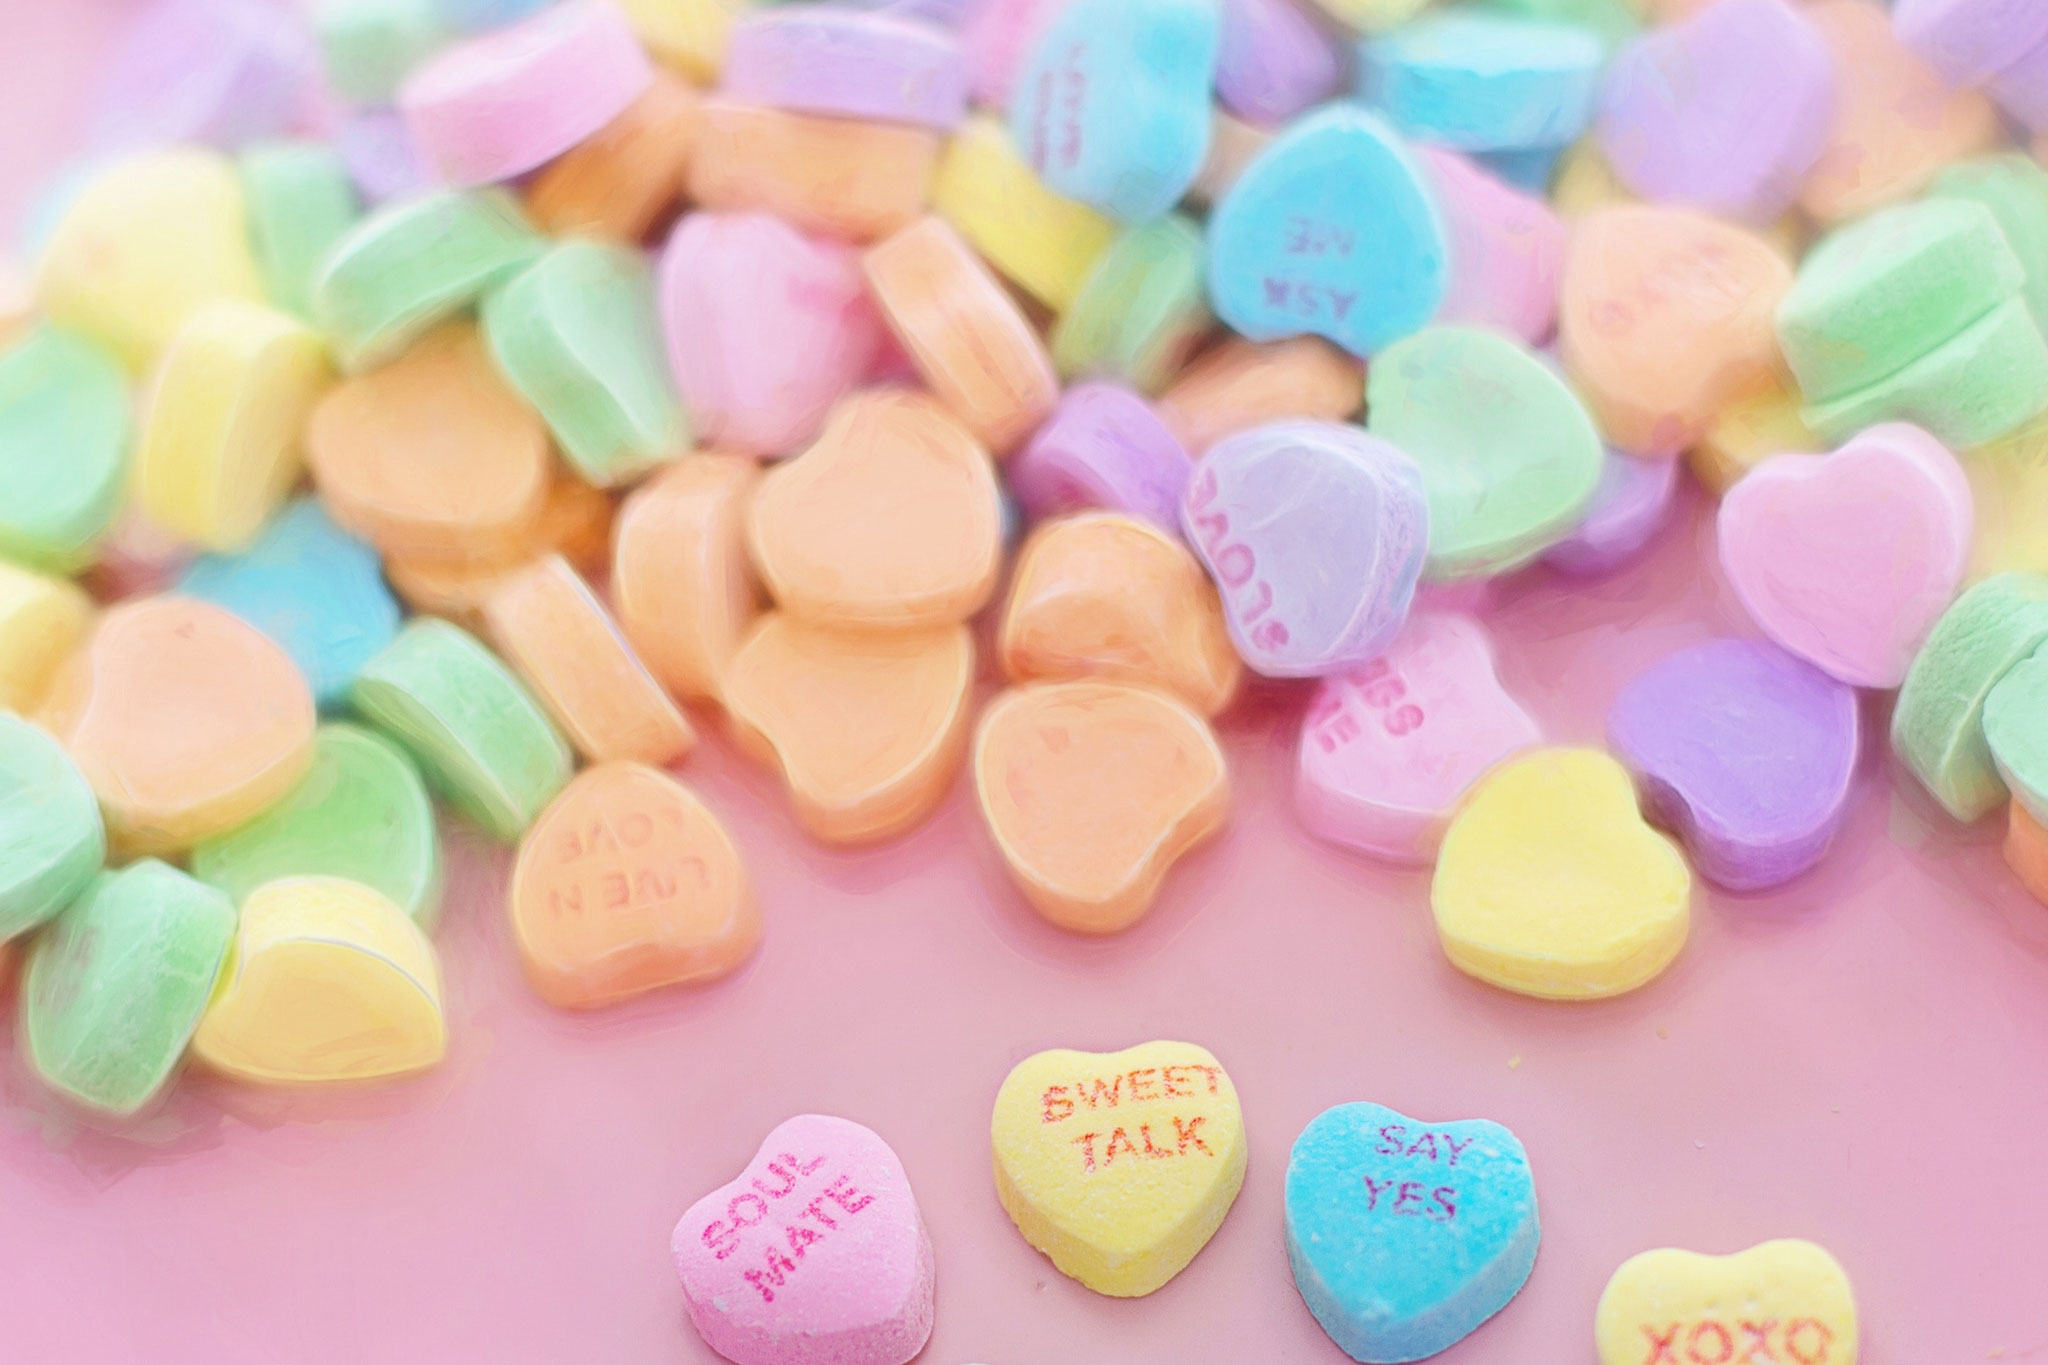 Multicolored Valentine's Day candy hearts with messages written on them scattered on a pink background